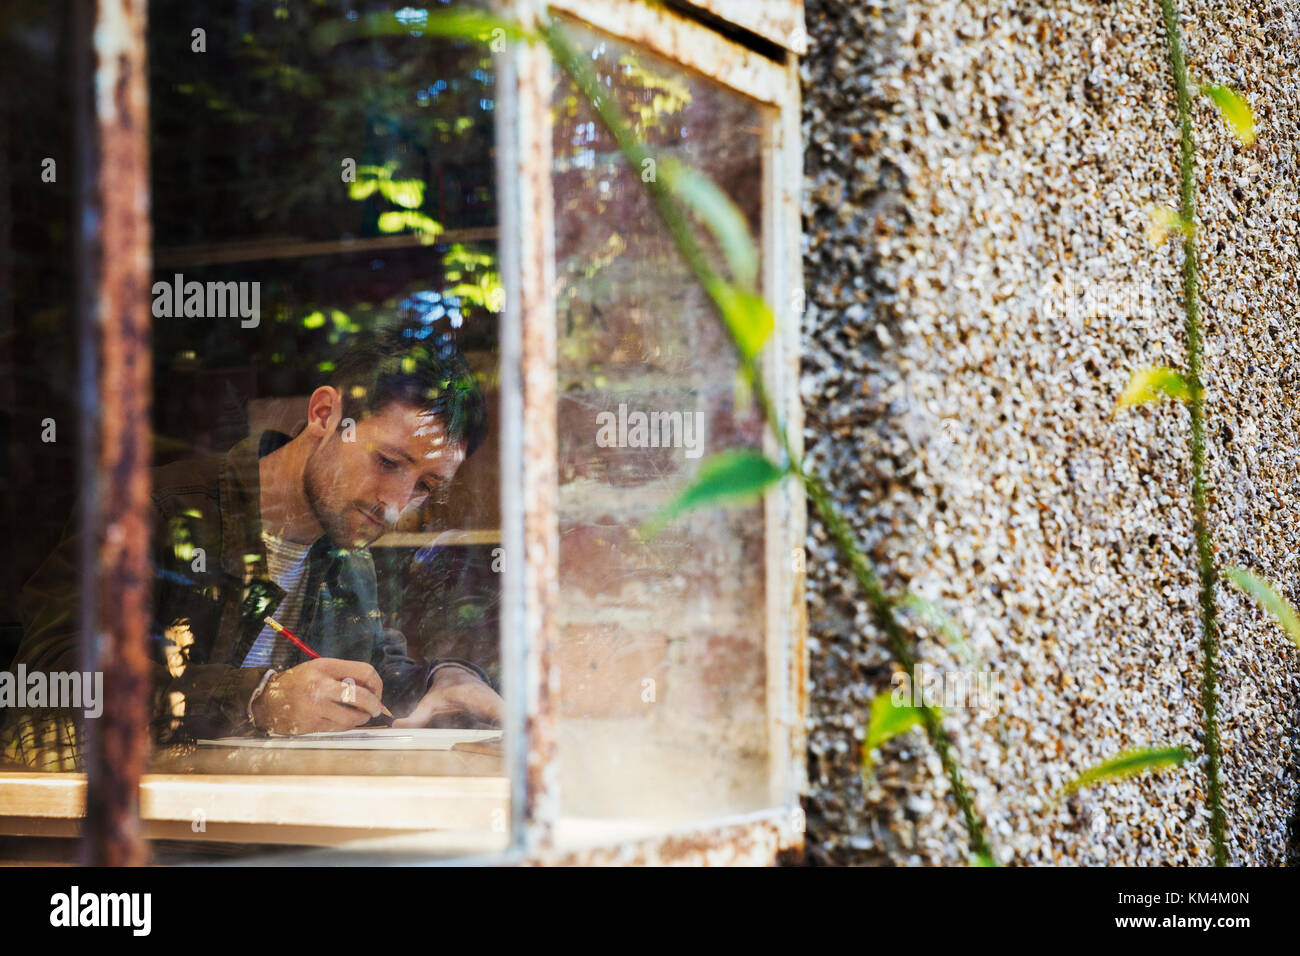 View through a window of a young man drawing in a notebook, a designer at work. Stock Photo